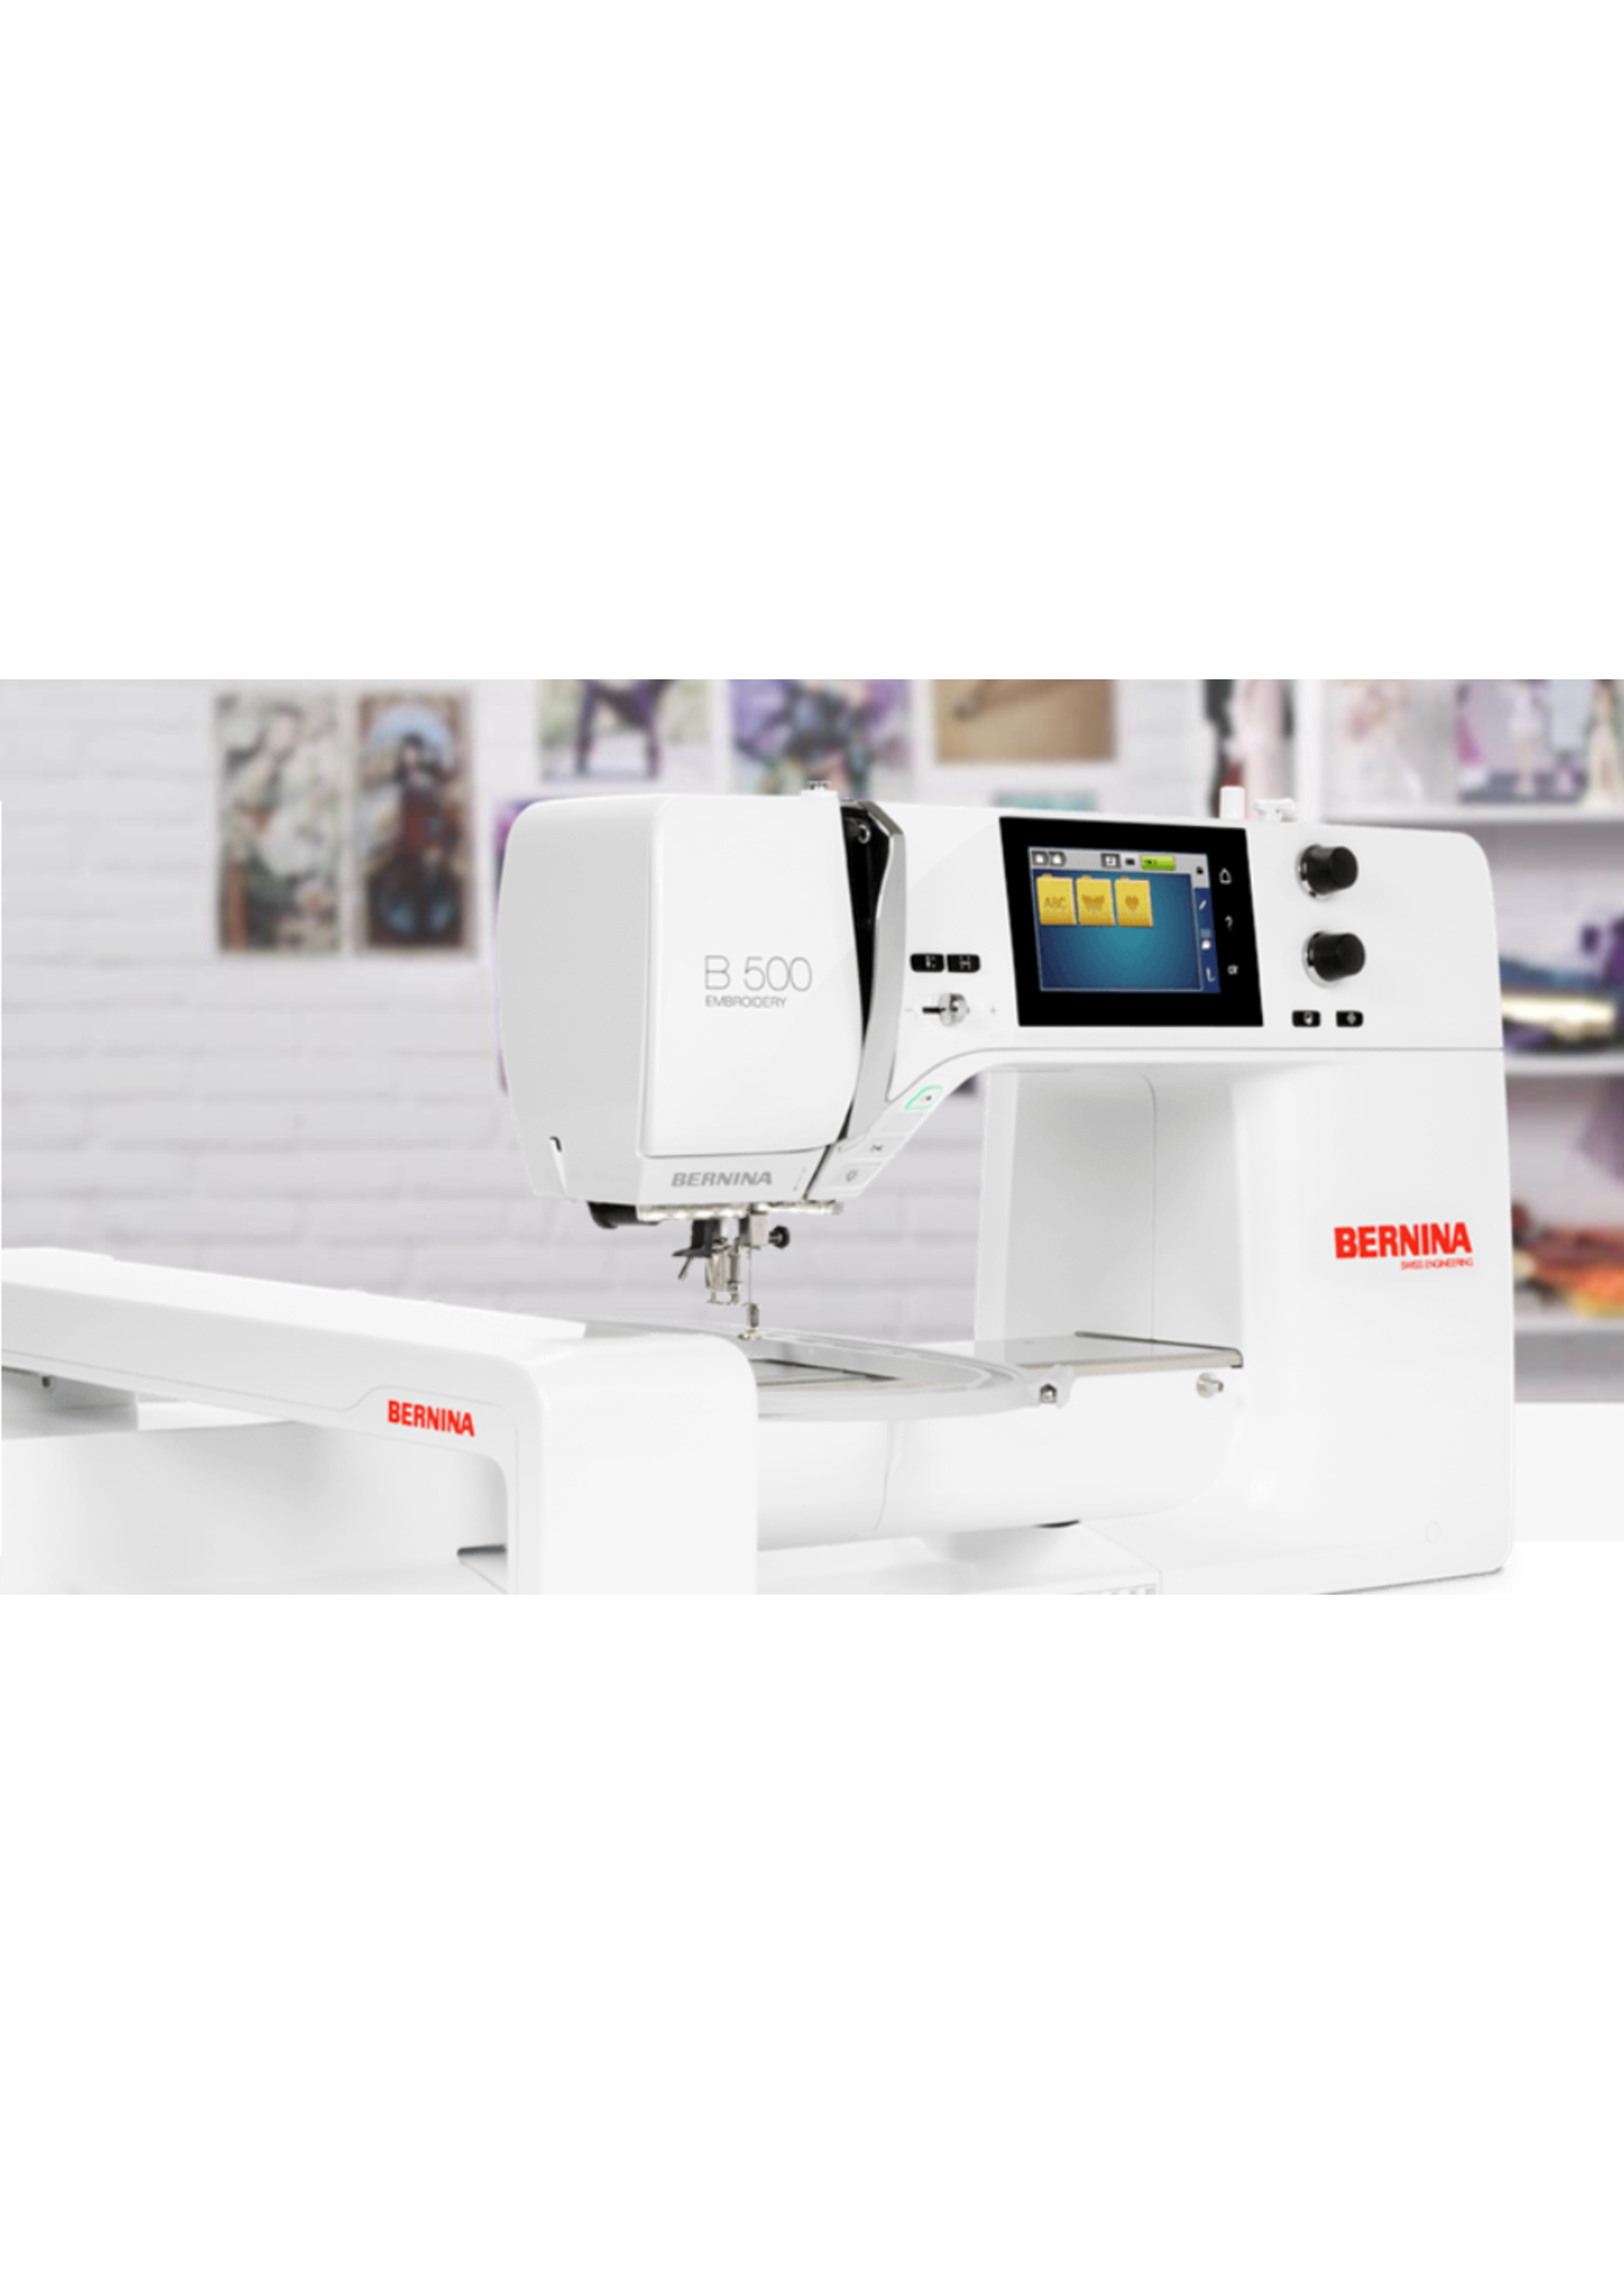 Bernina B500  Embroidery only machine - no module -AVAILABLE FOR IN-STORE PURCHASE ONLY